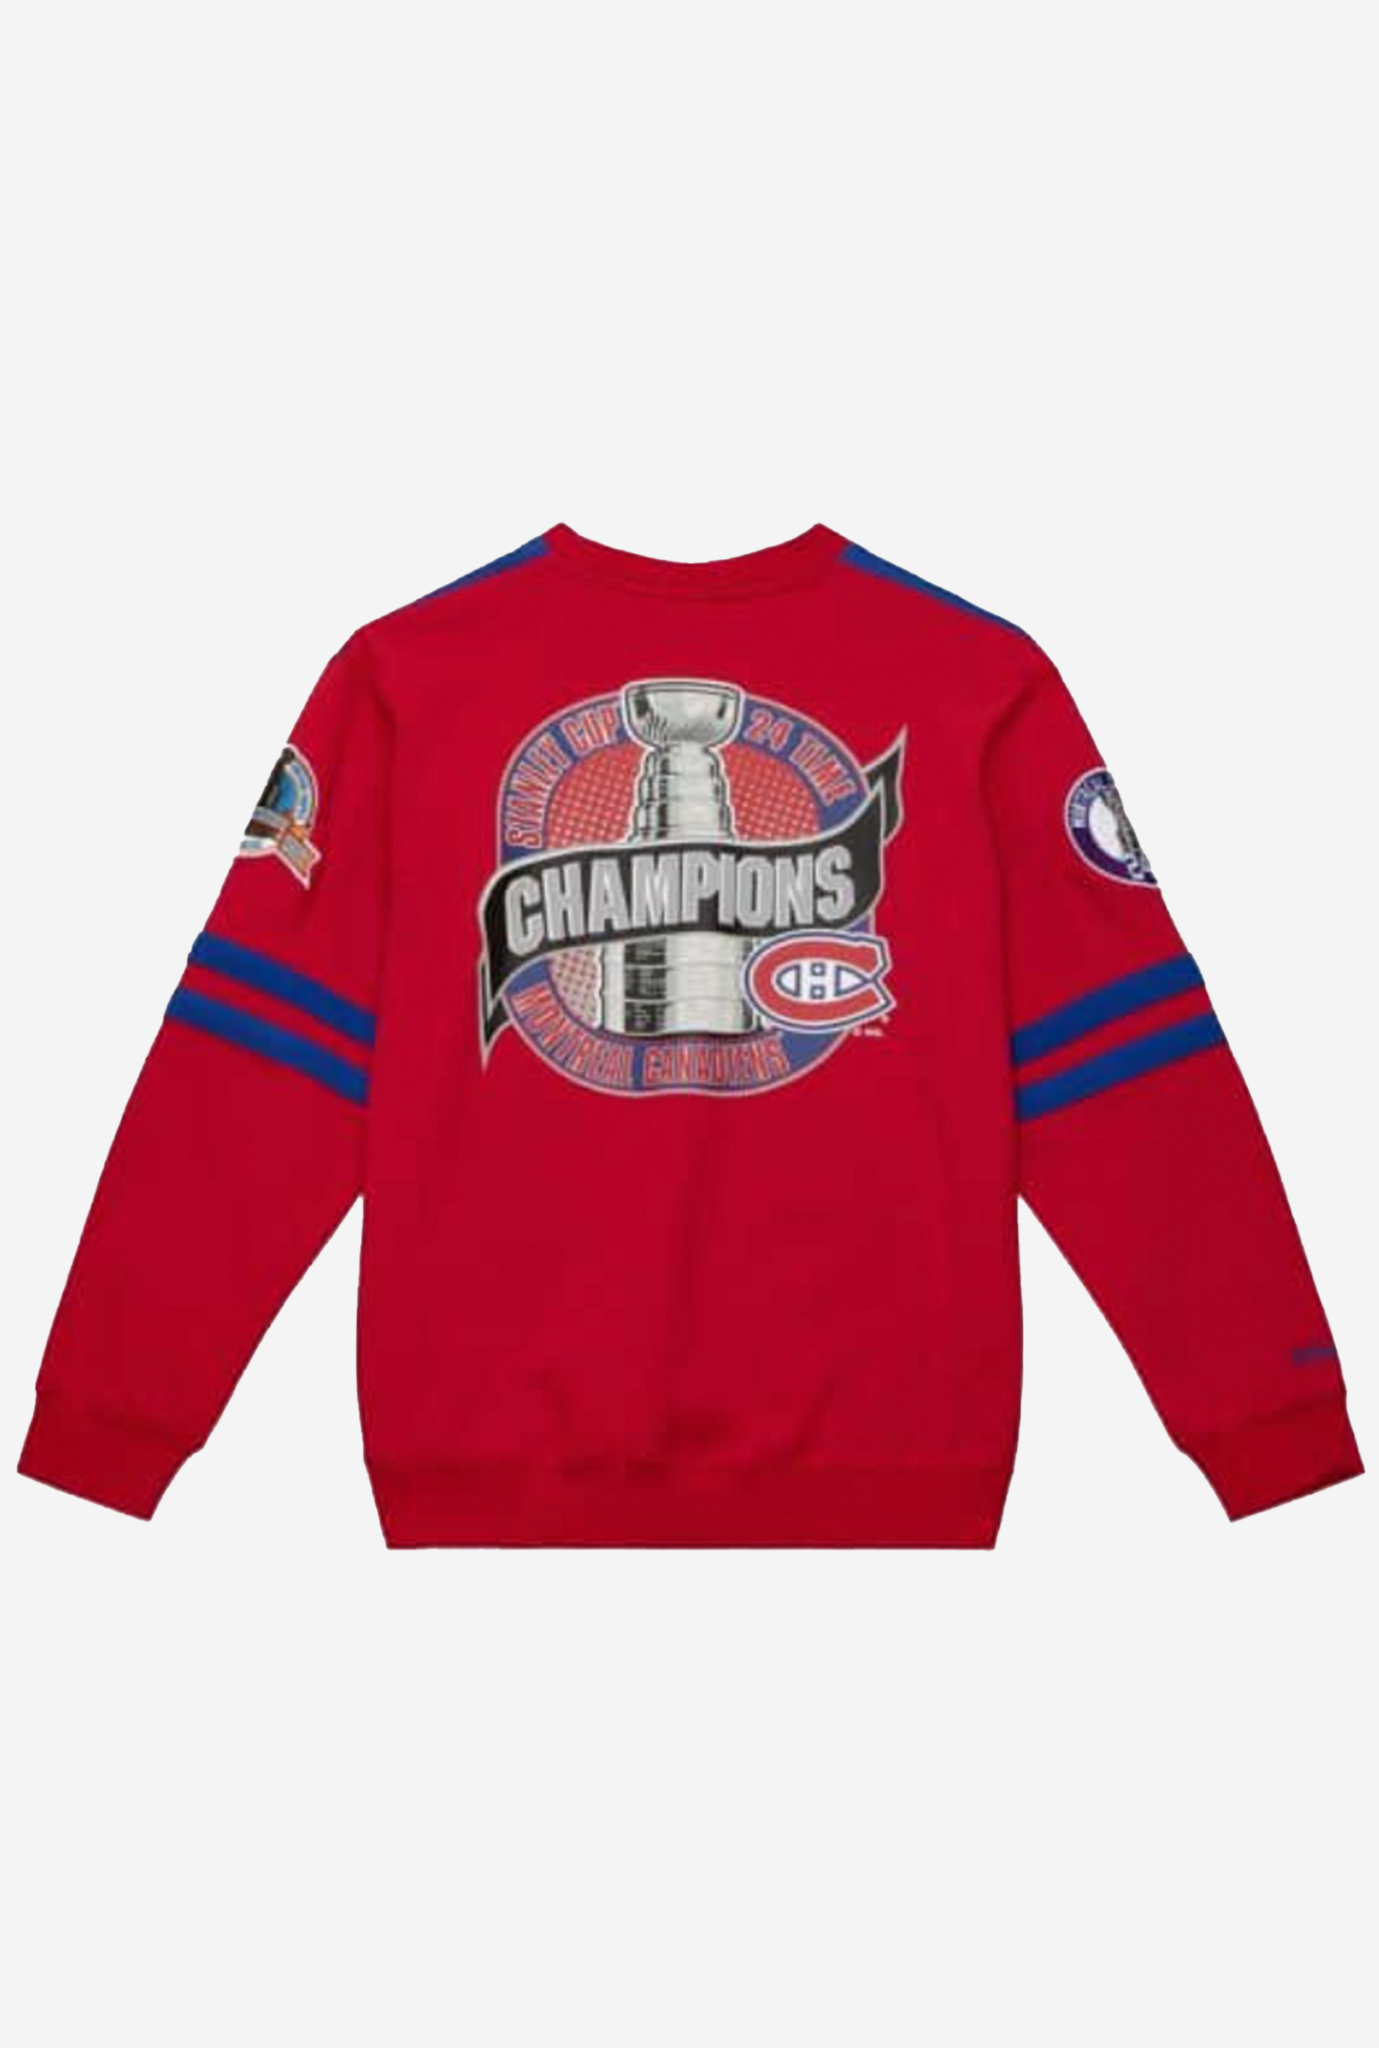 Montreal Canadiens All Over Crewneck 2.0 - Royal Blue/Red